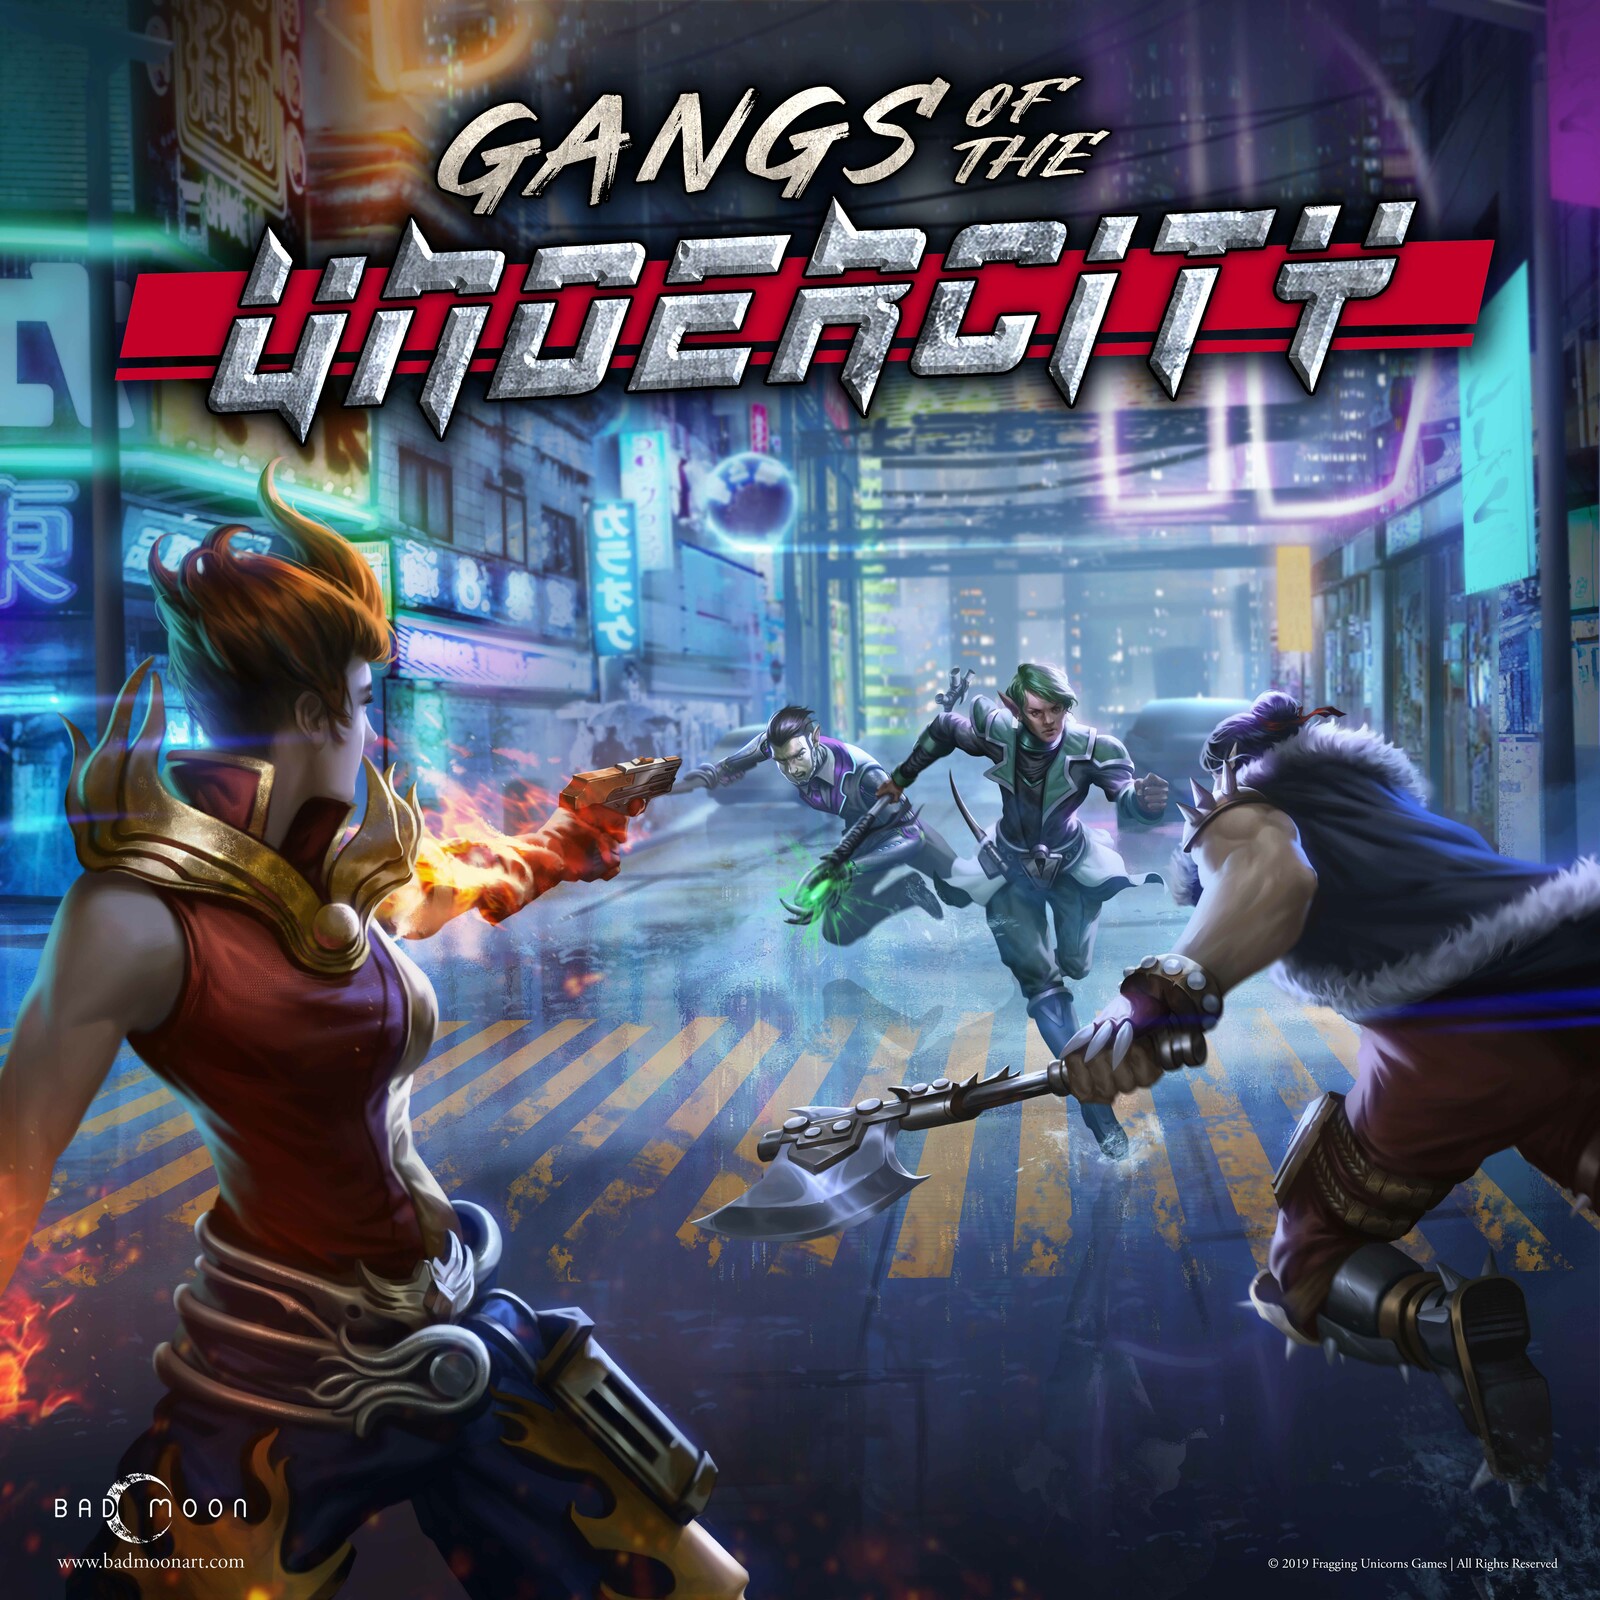 Gangs of the Undercity